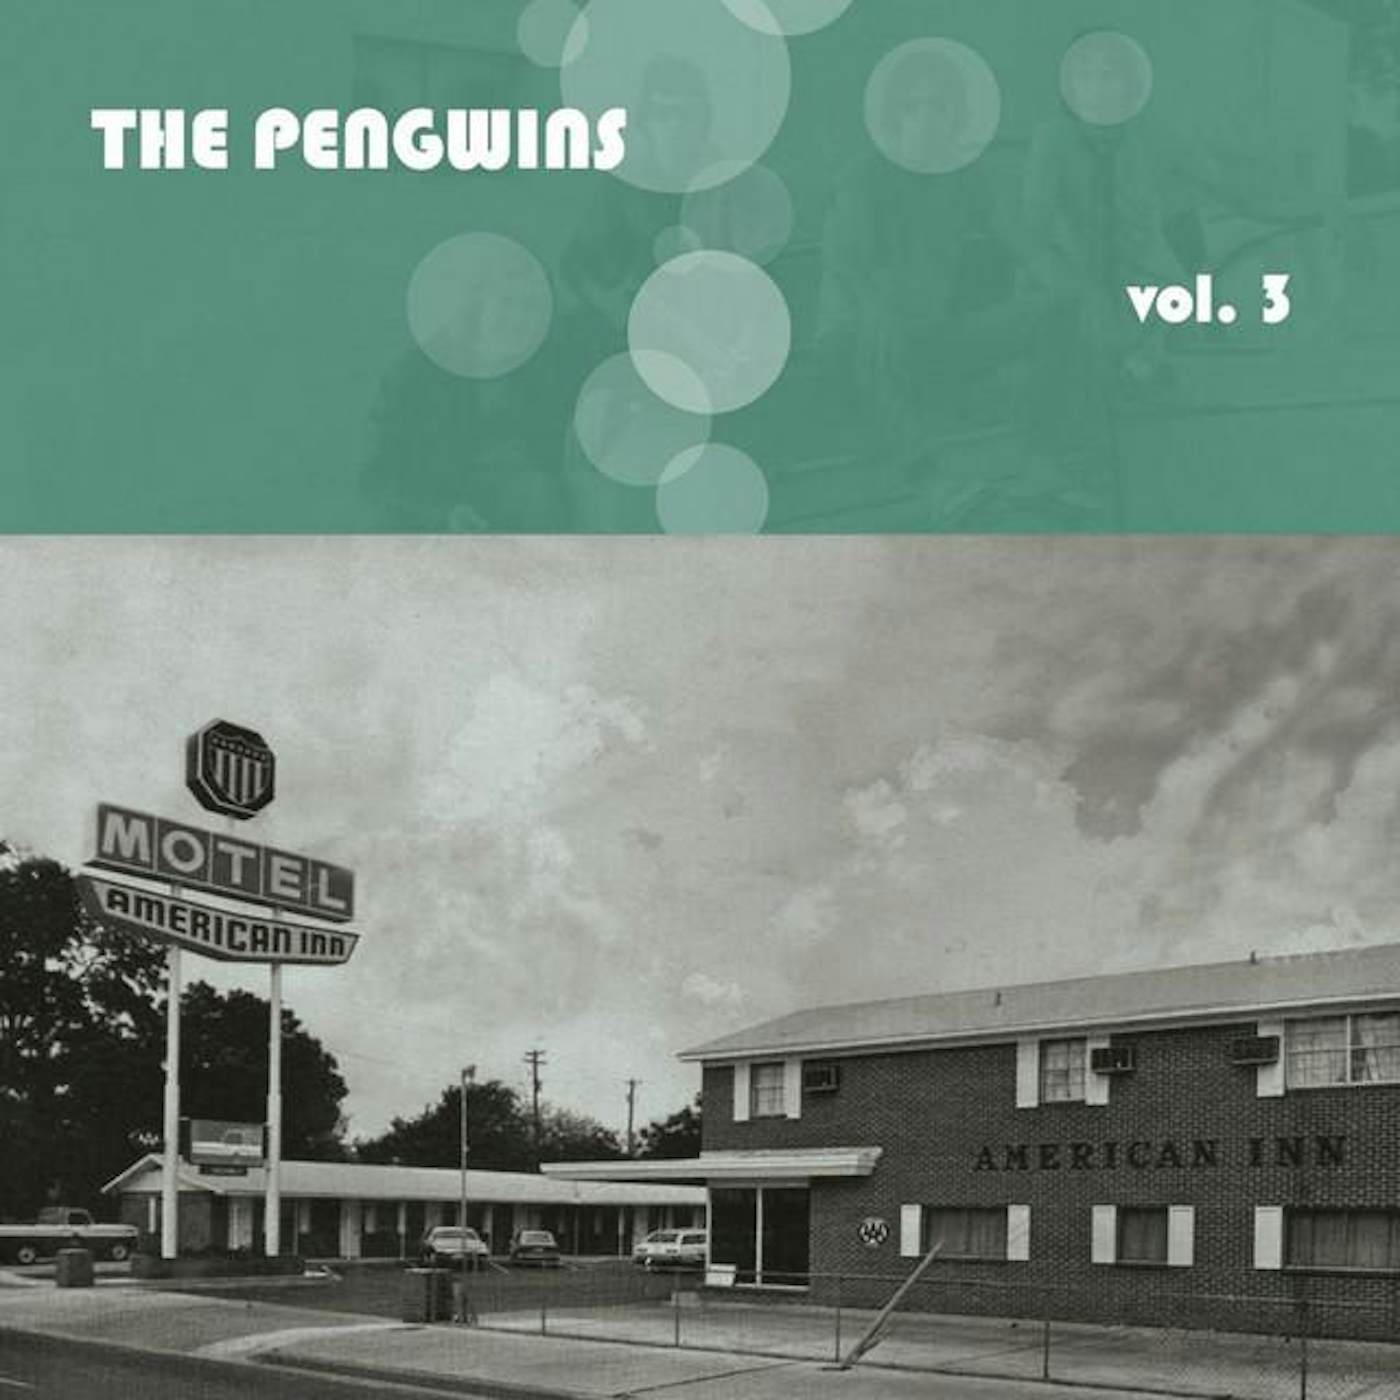 The Pengwins